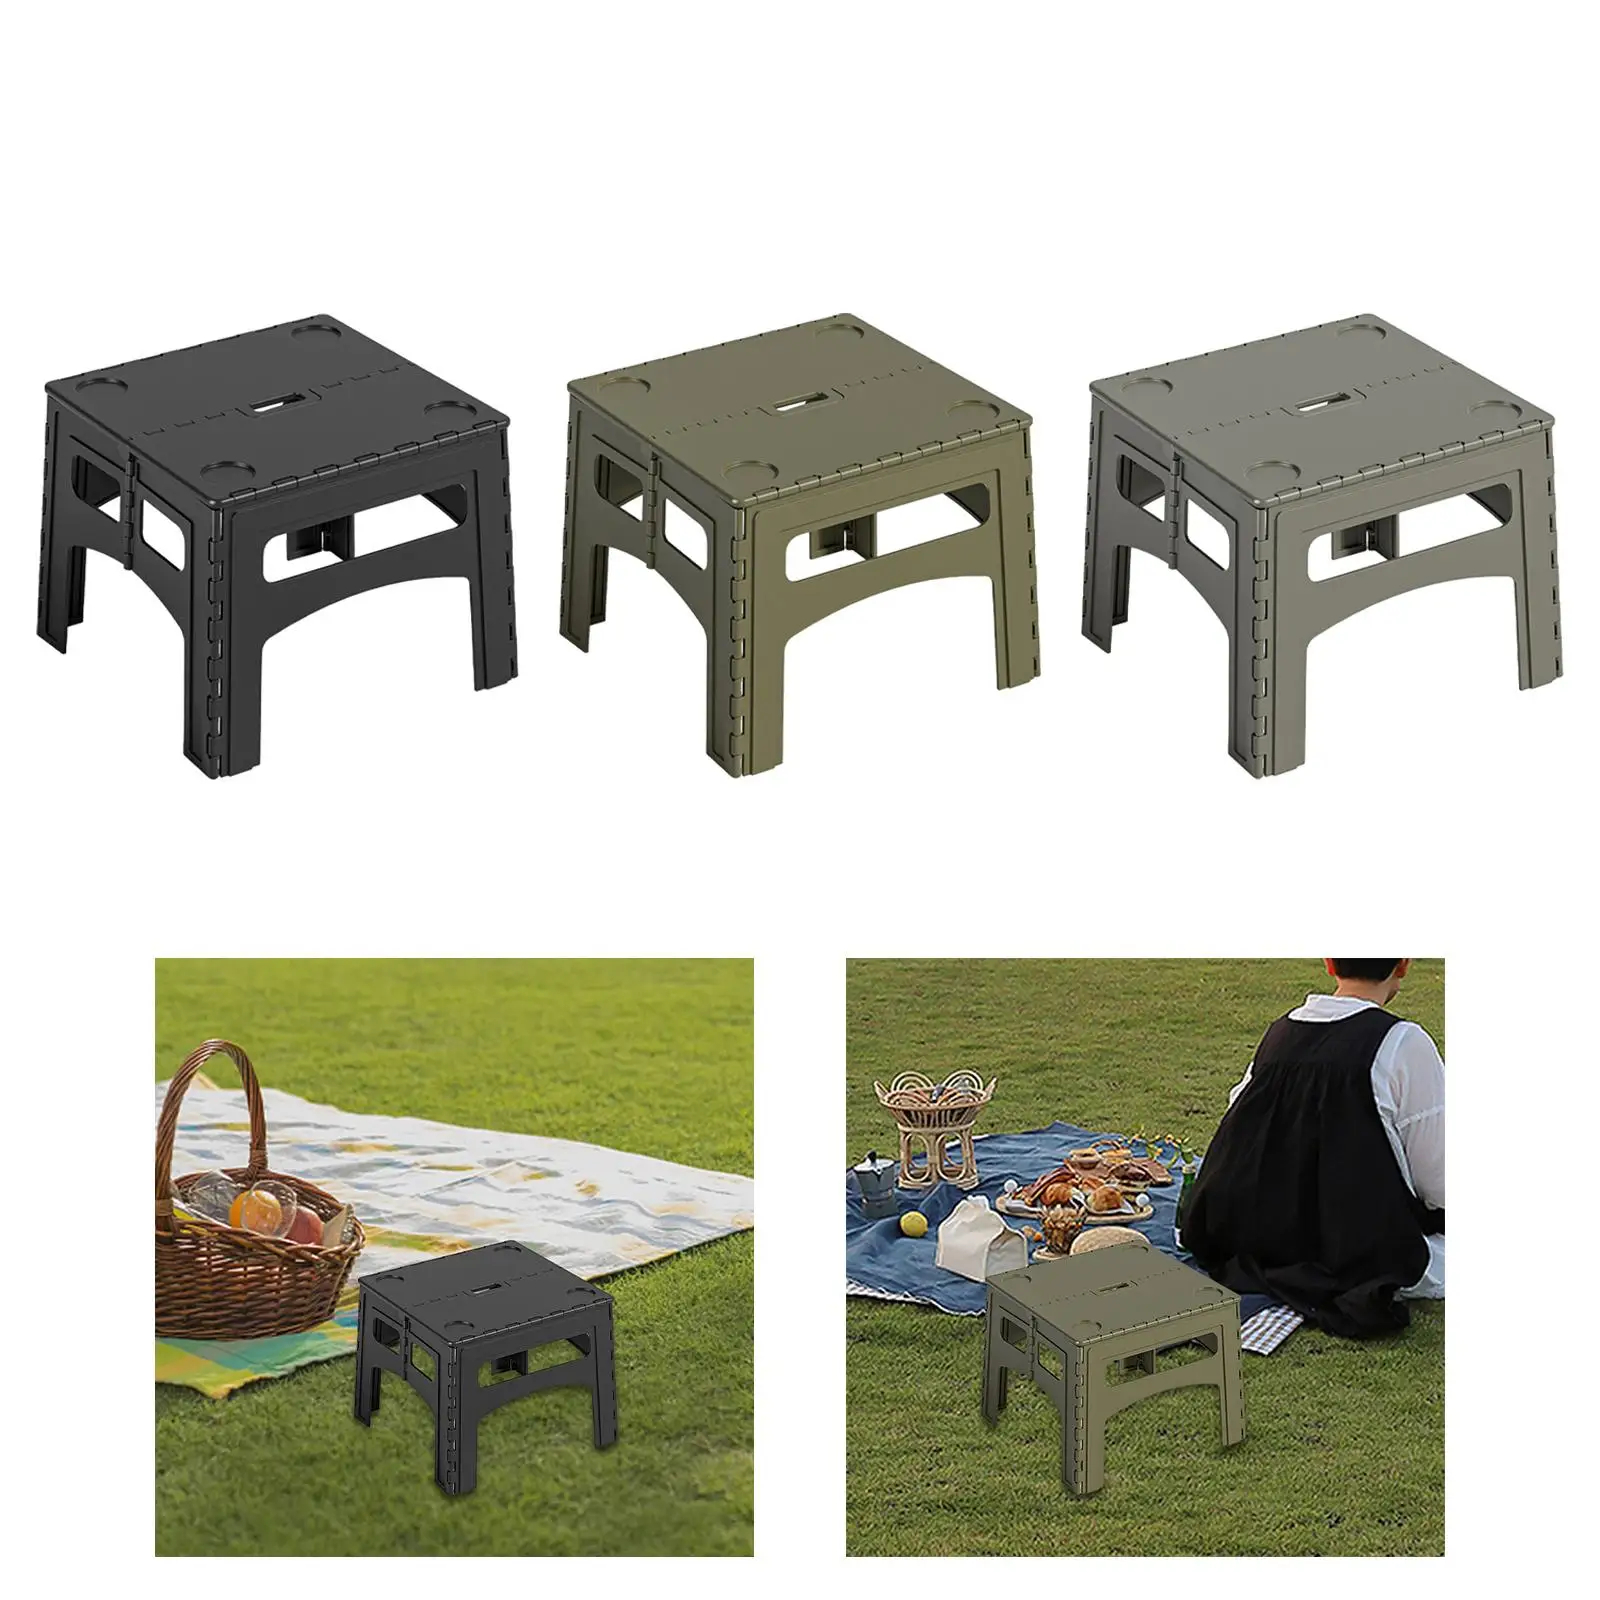 Foldable Picnic Table Portable Camping Table Outdoor Folding Table for Fishing, Backpacking, Travel, Cooking, Self Driving